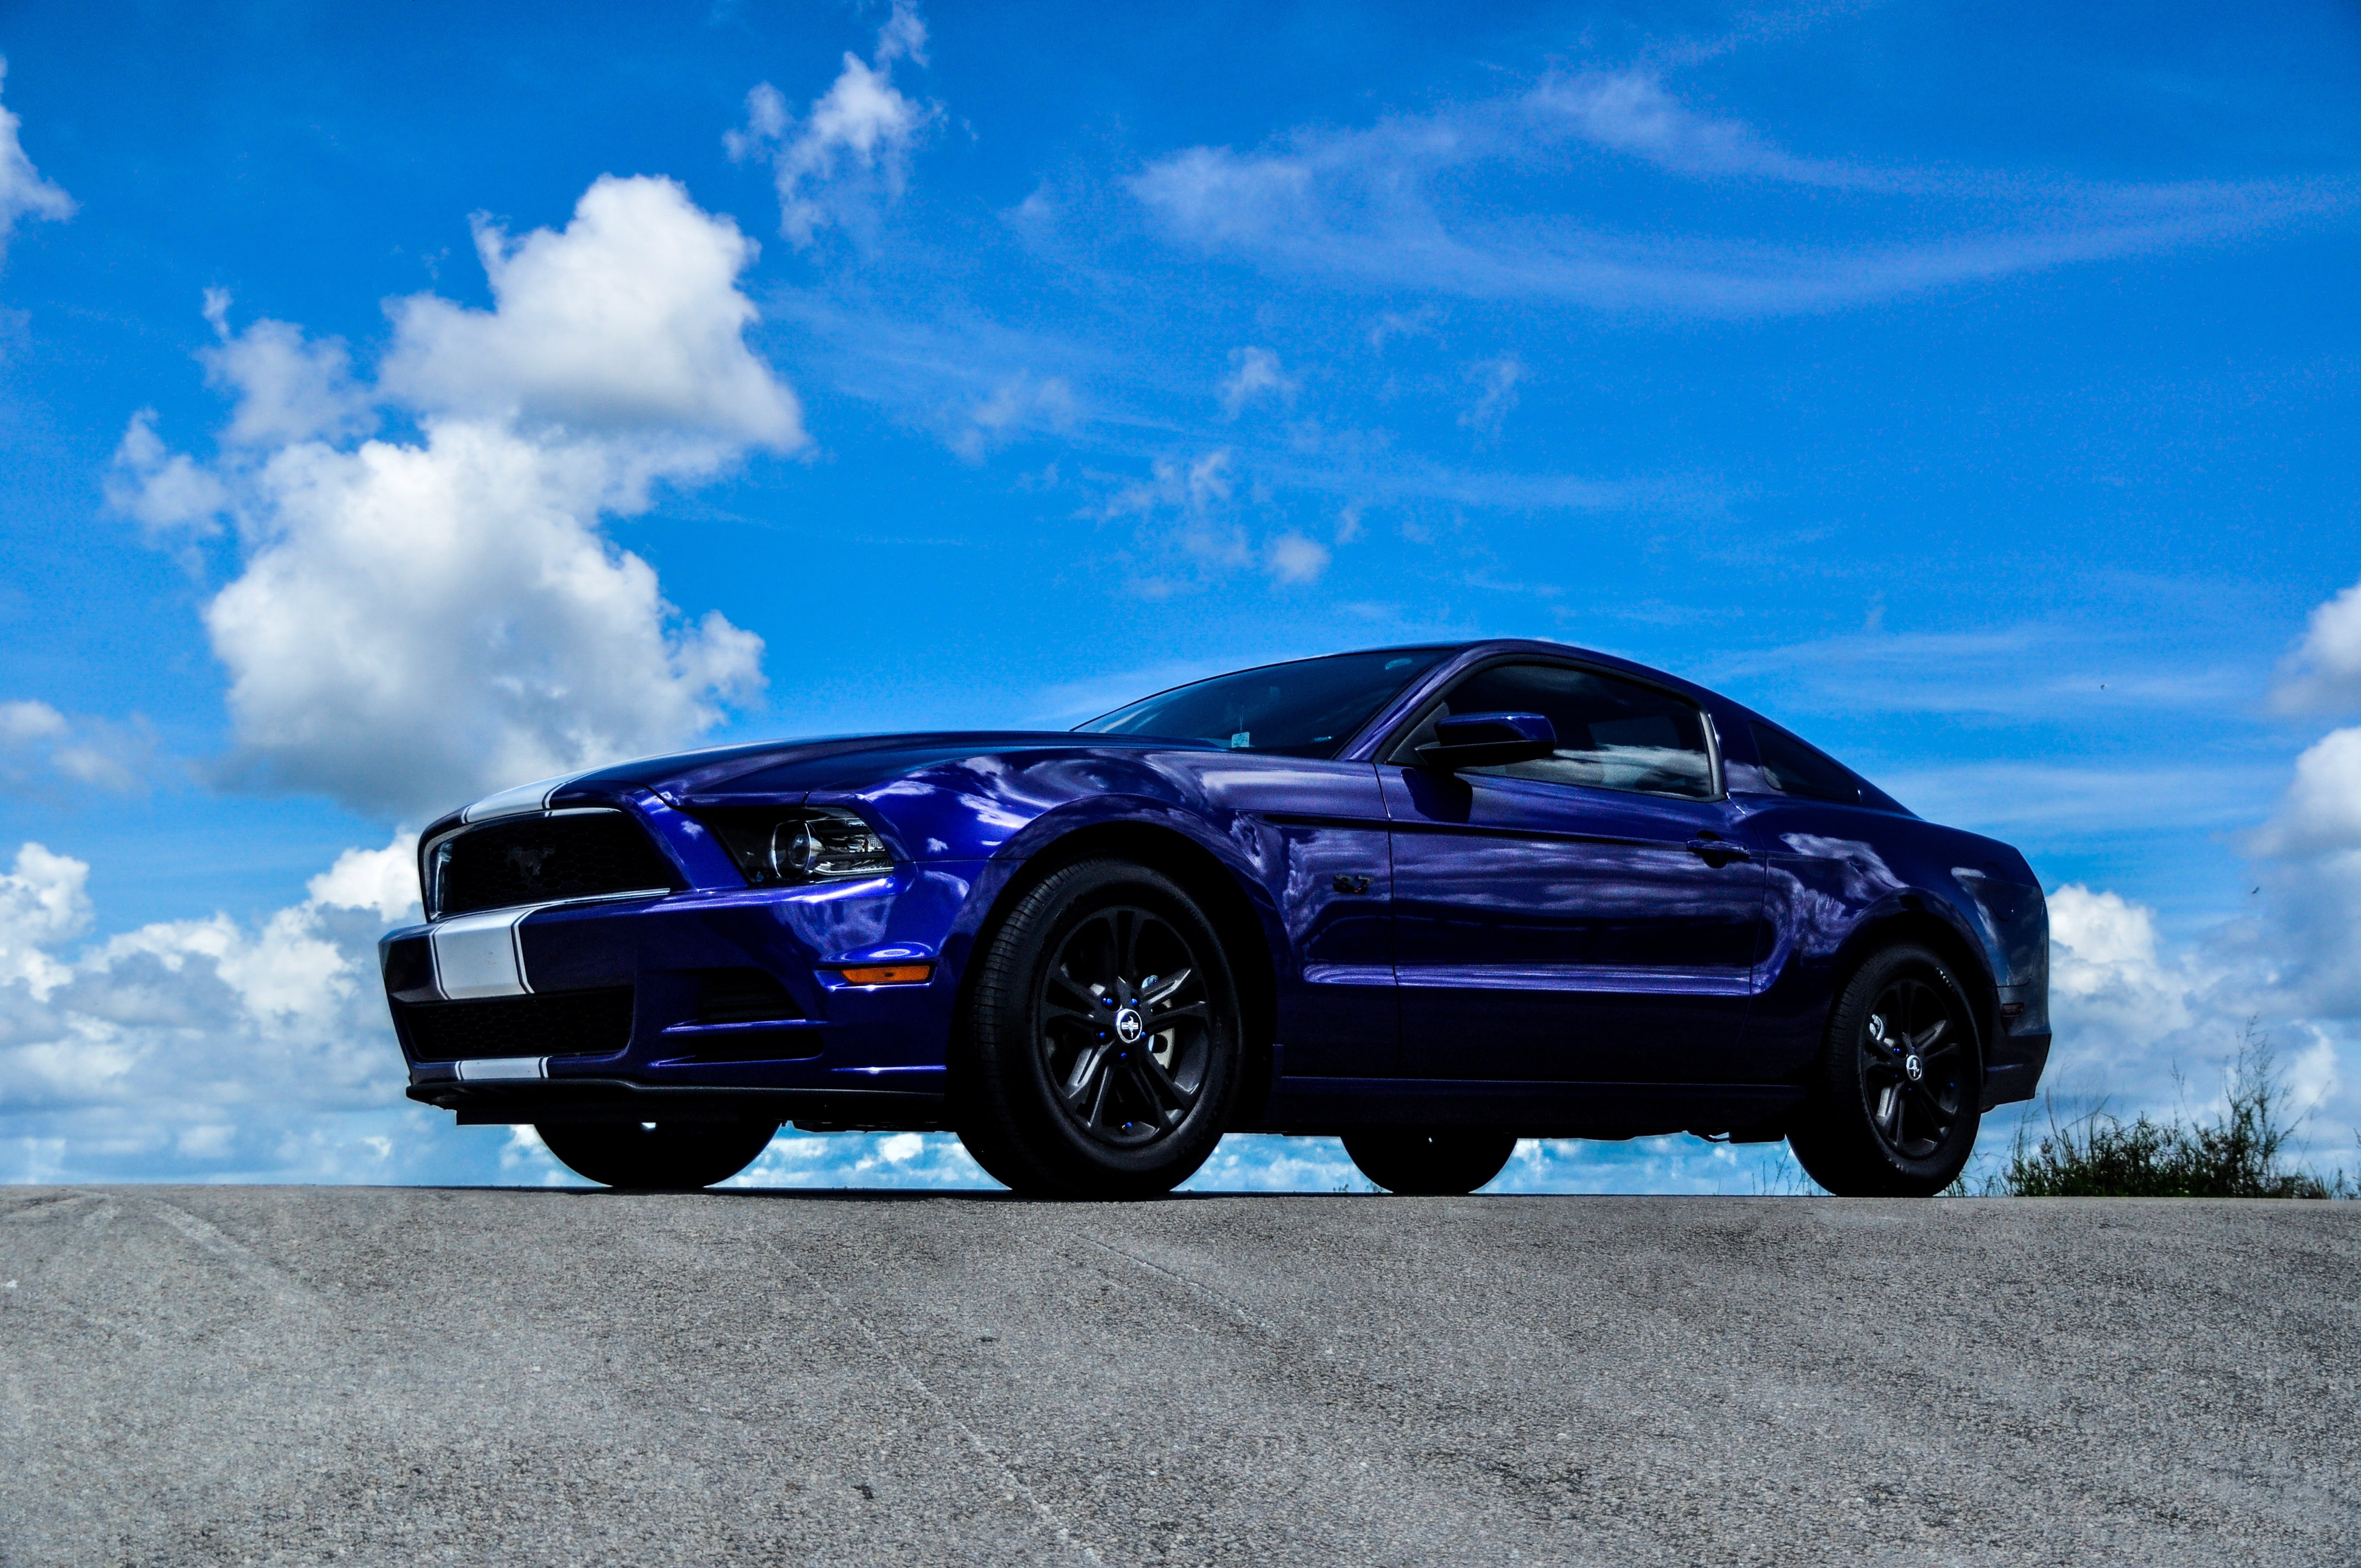 Ford, Ford Mustang, Blue Car, Muscle Car, Vehicle